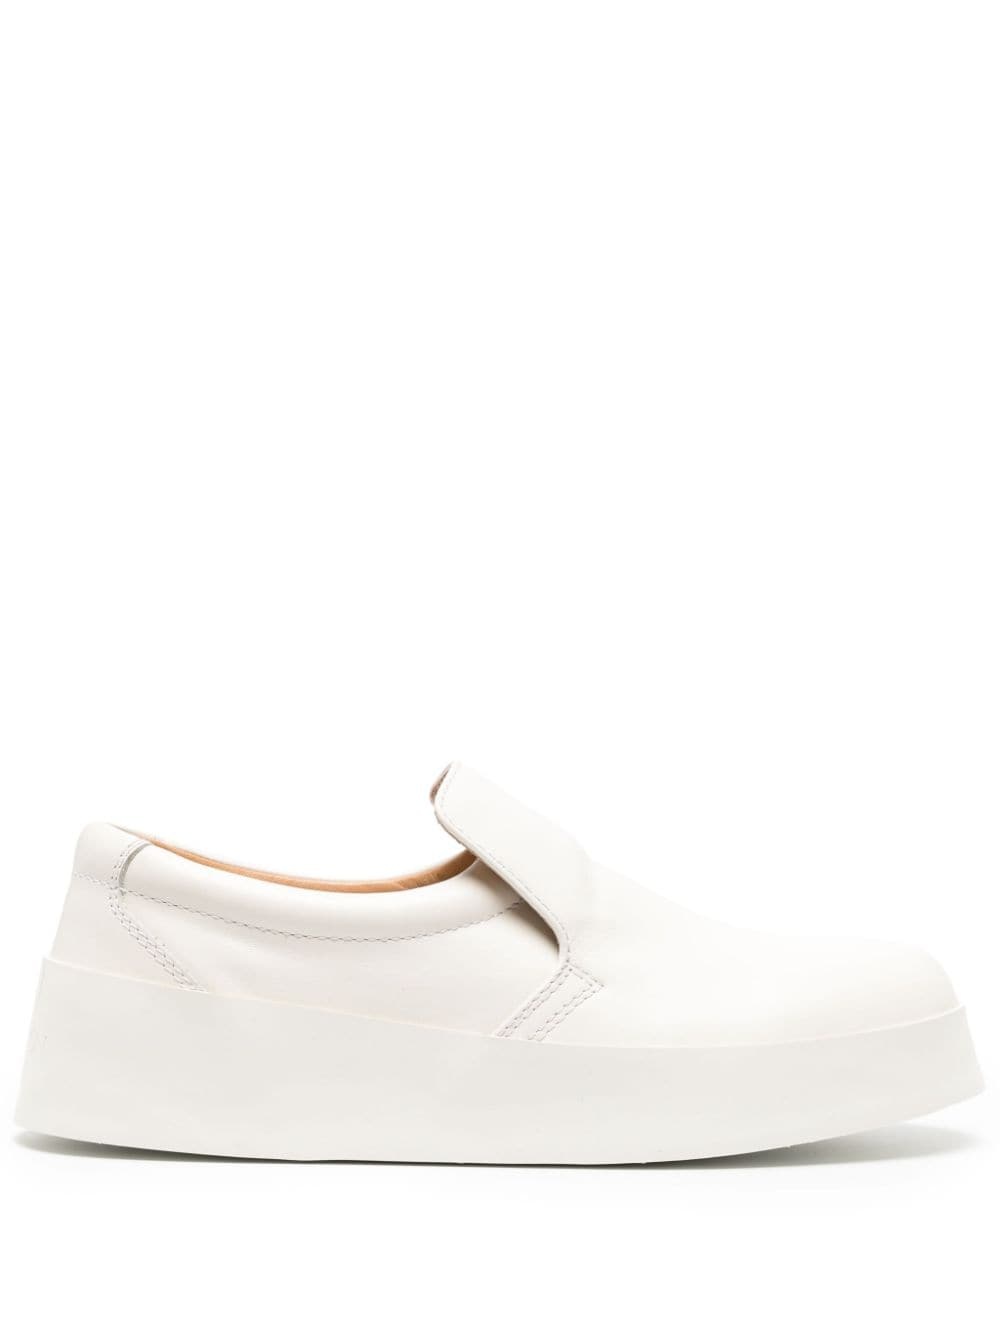 slip-on leather sneakers - 1